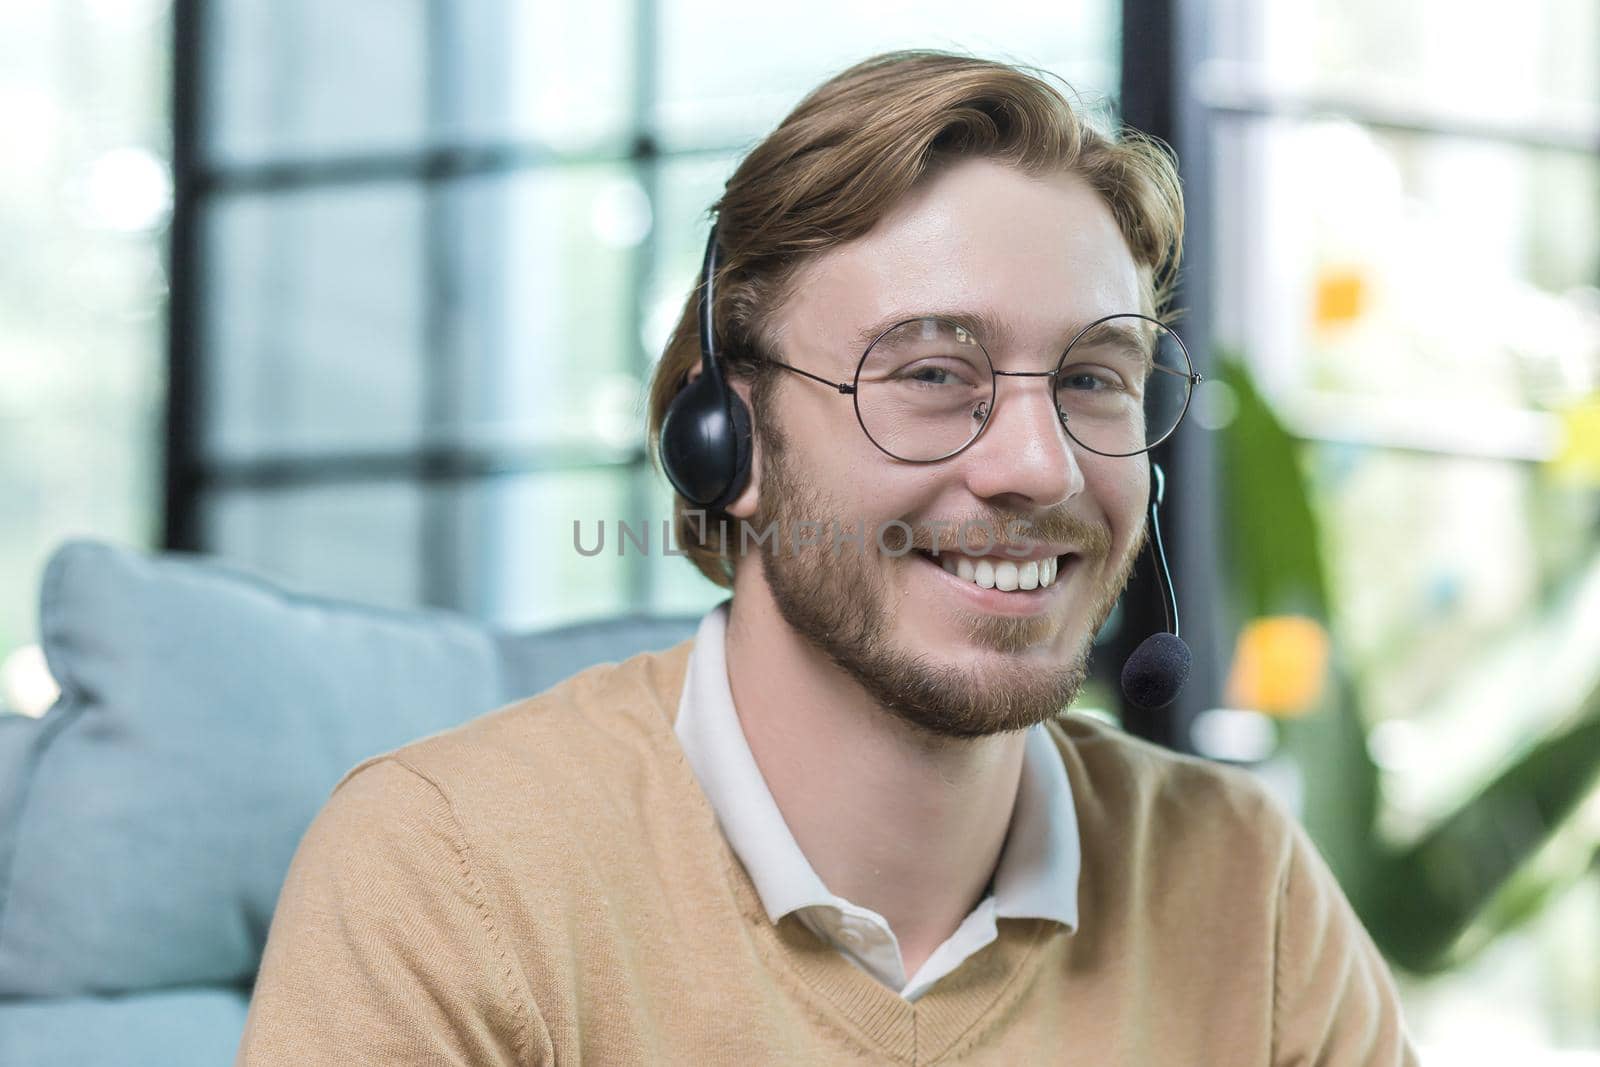 Close-up photo of man wearing headset for video call, businessman working inside office building, smiling and looking at camera, employee at work wearing glasses